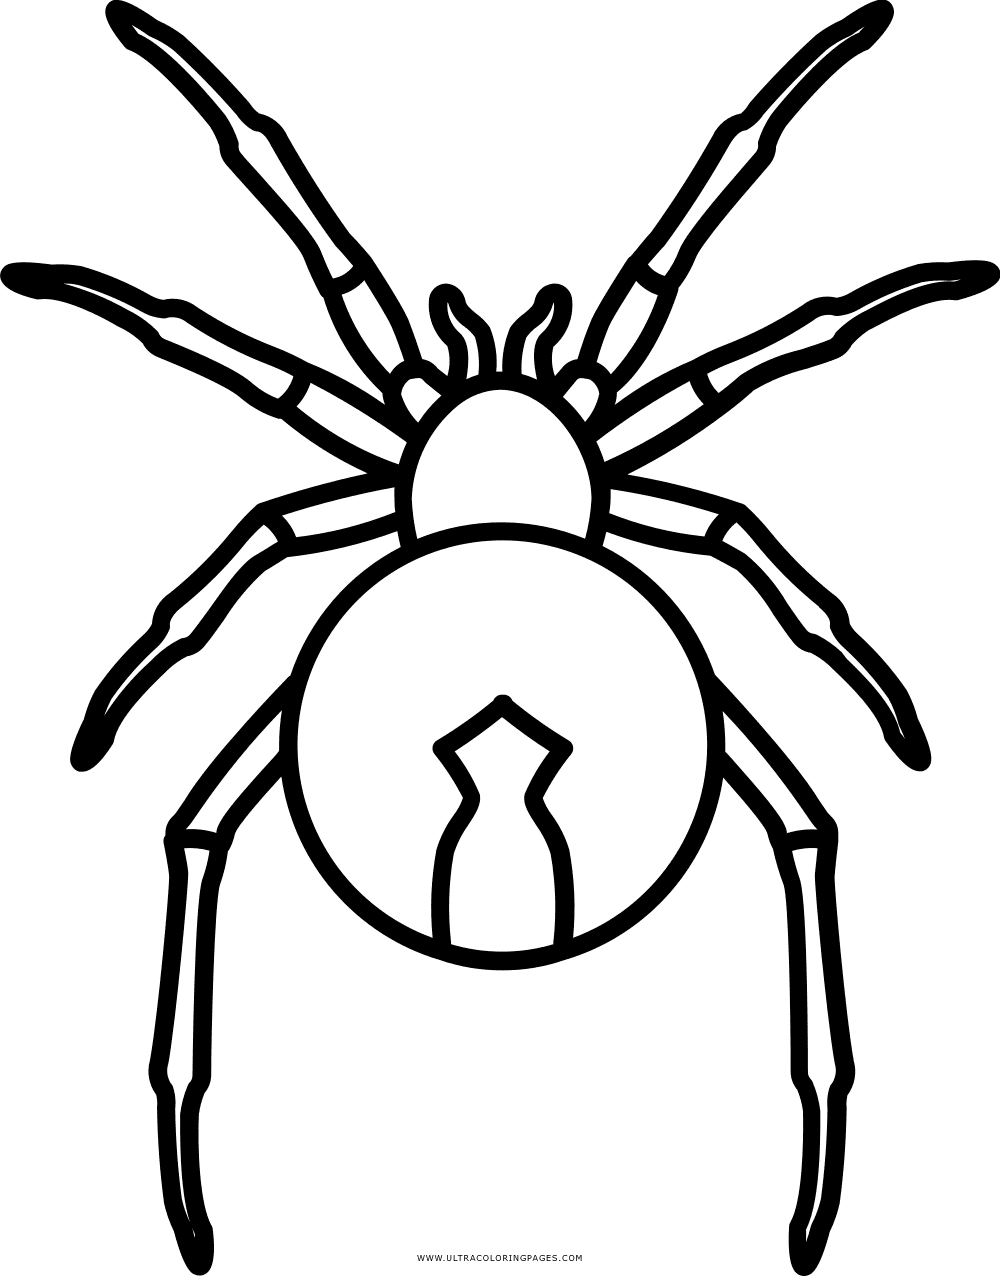 Spider Free Coloring Page